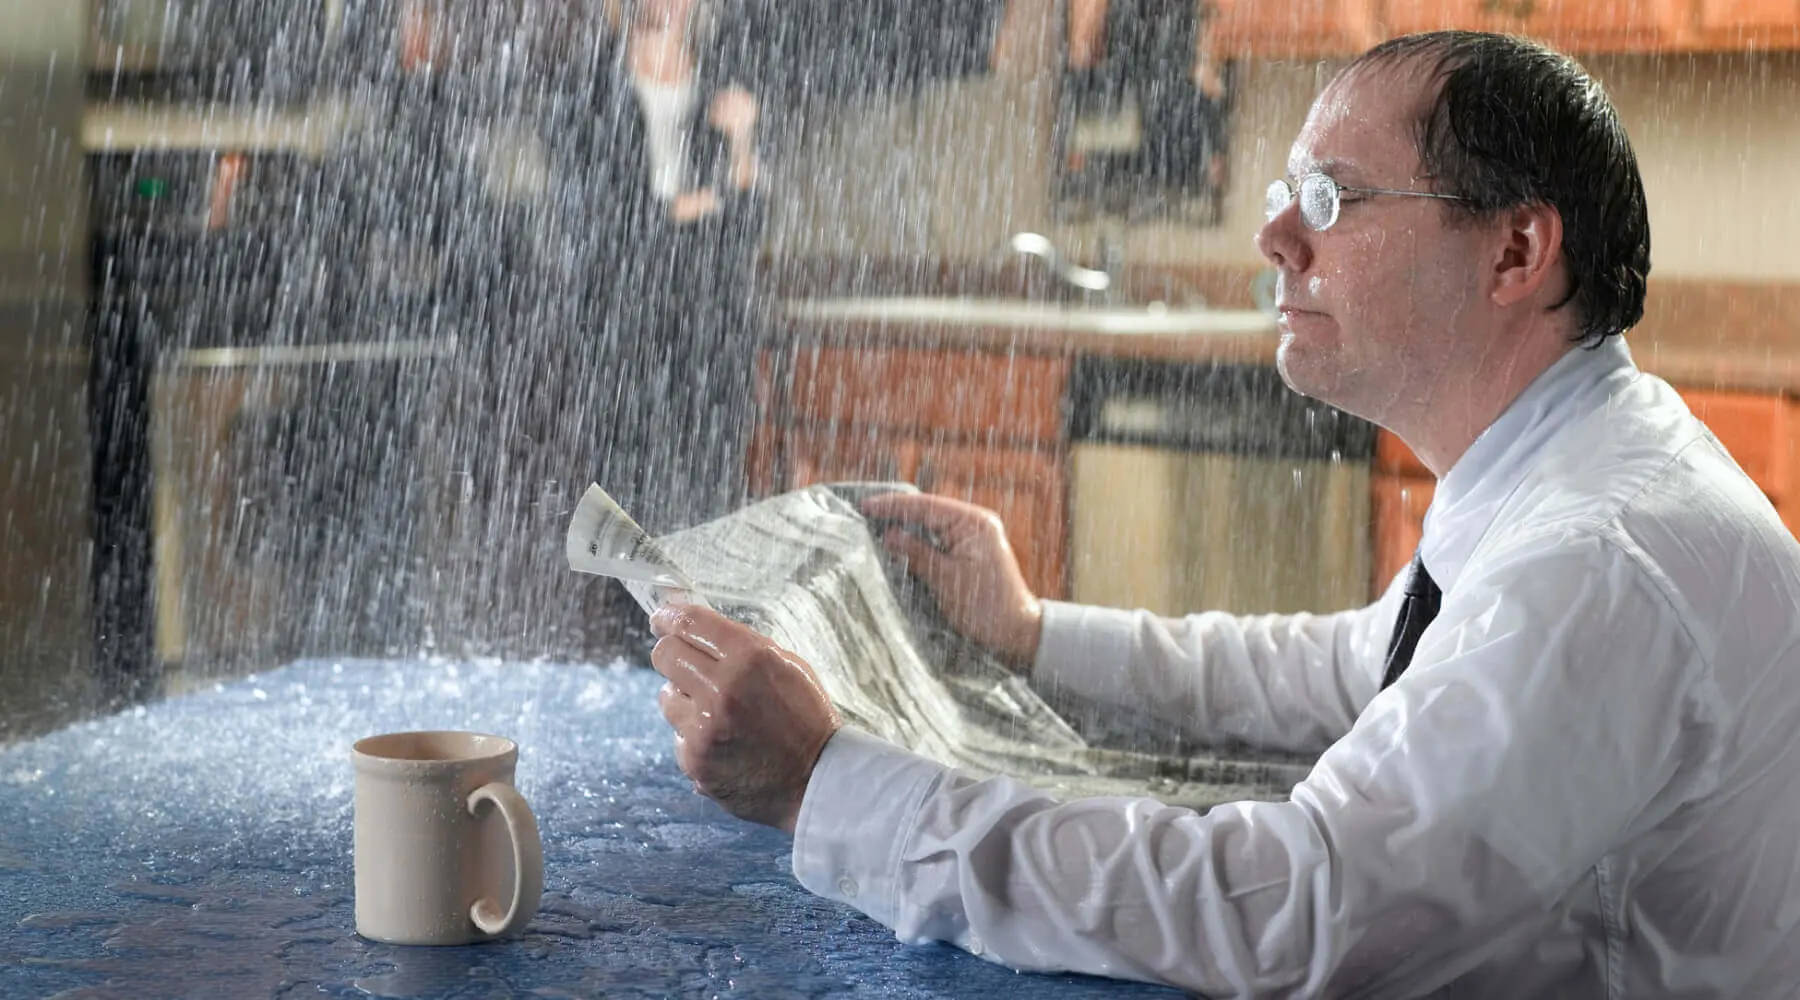 Man reading a newspaper getting rained on inside his home